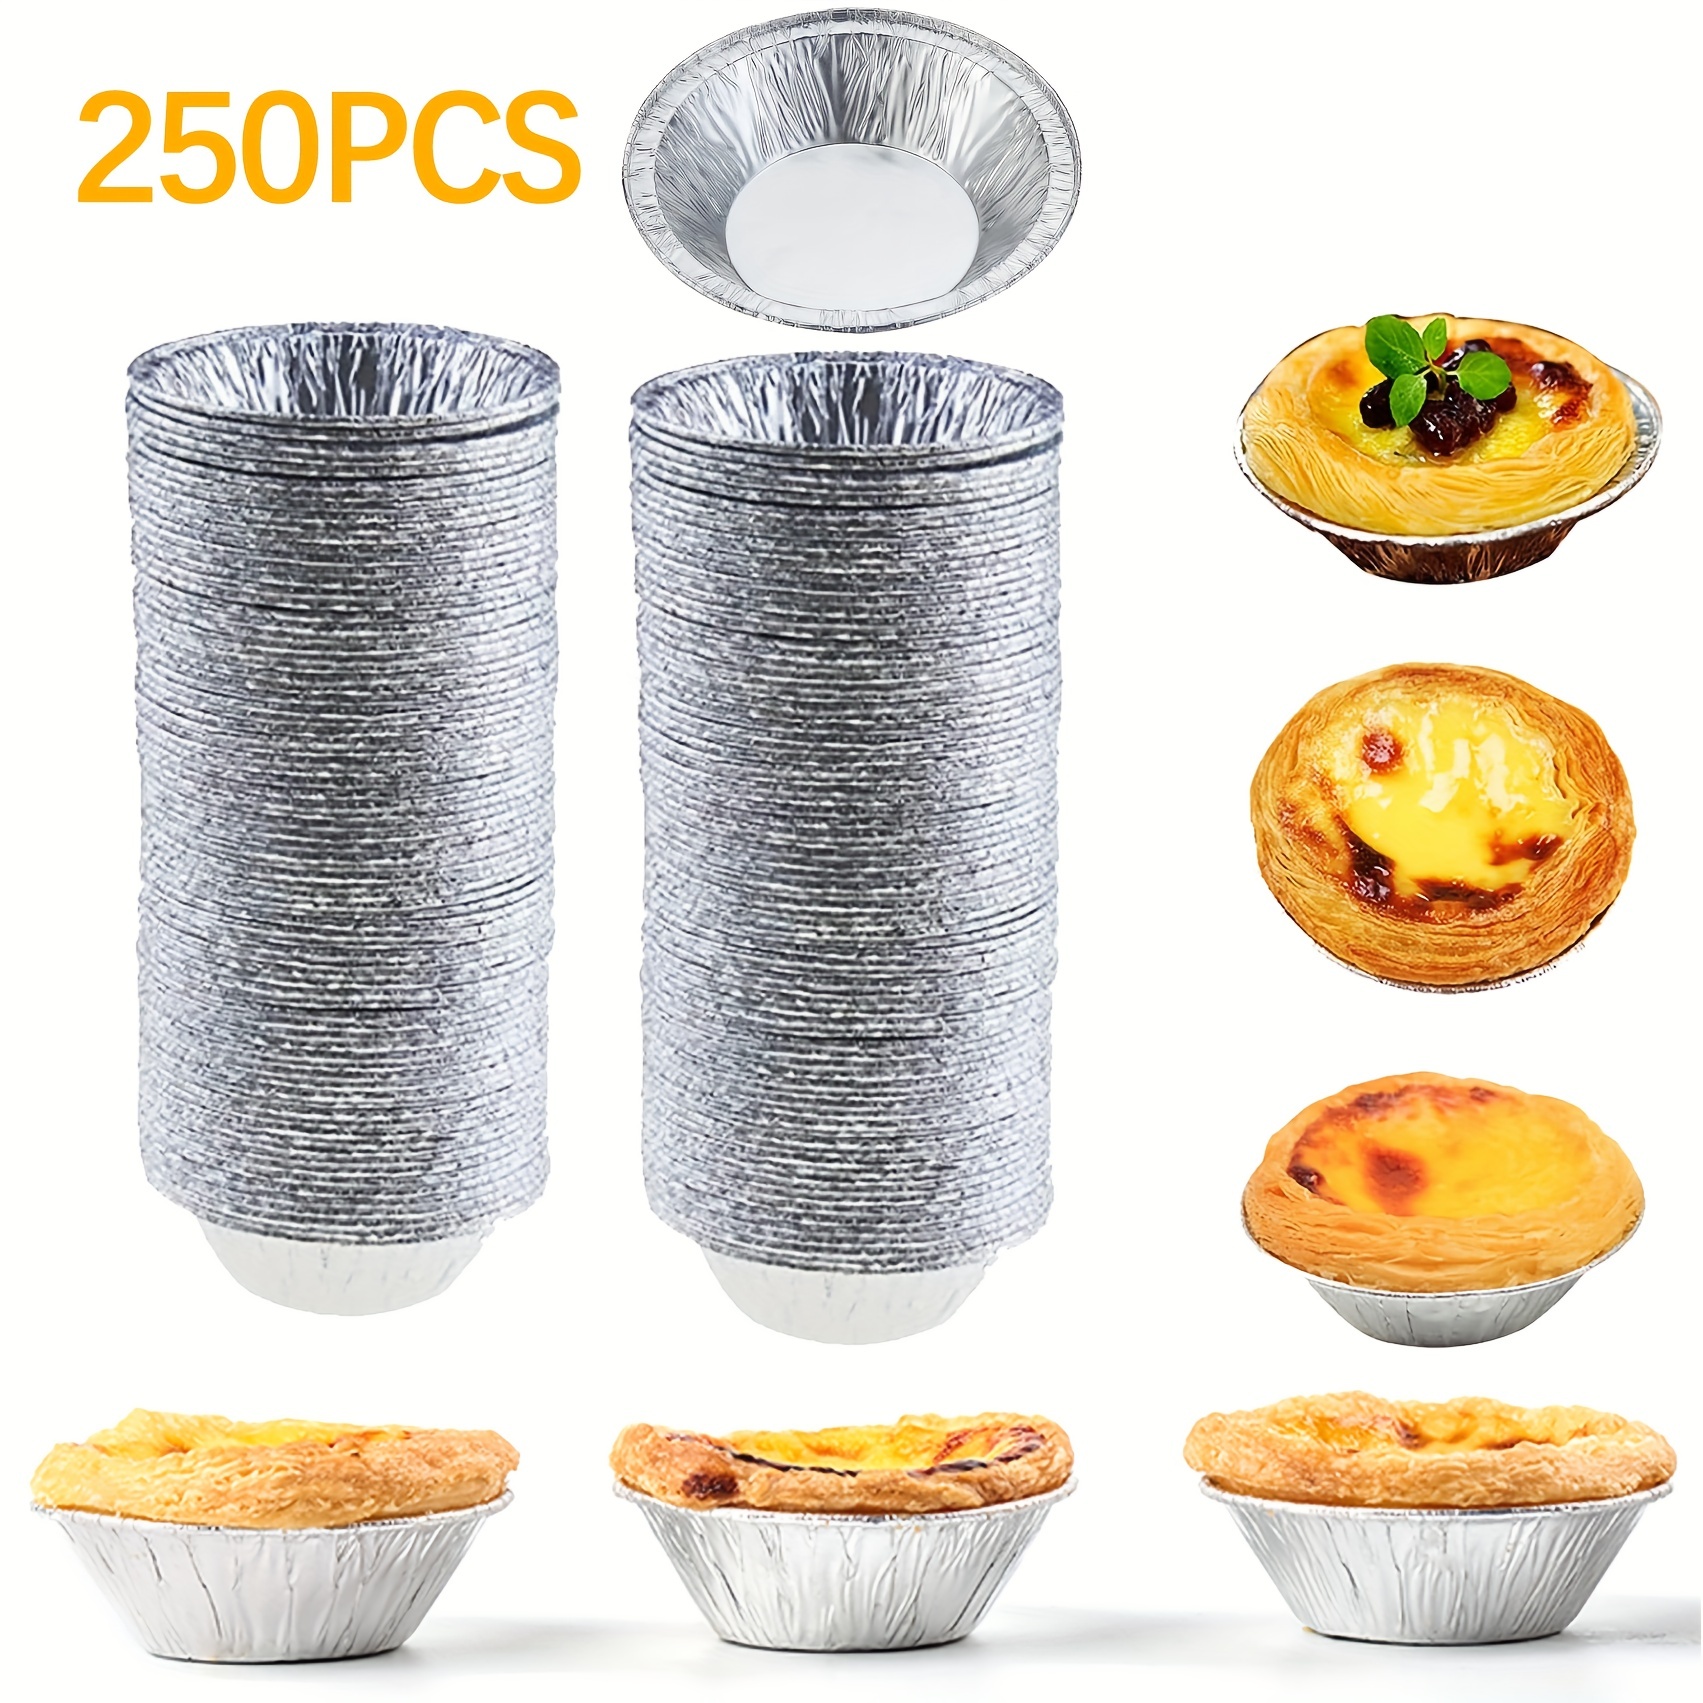 SDJMa 20pack- 3Aluminum foil Pans Disposable Heavy Duty Square baking Cake  Pans, Cooking Tins Homemade Breads Oven Pans,Foil Pans, Baking cake Pans